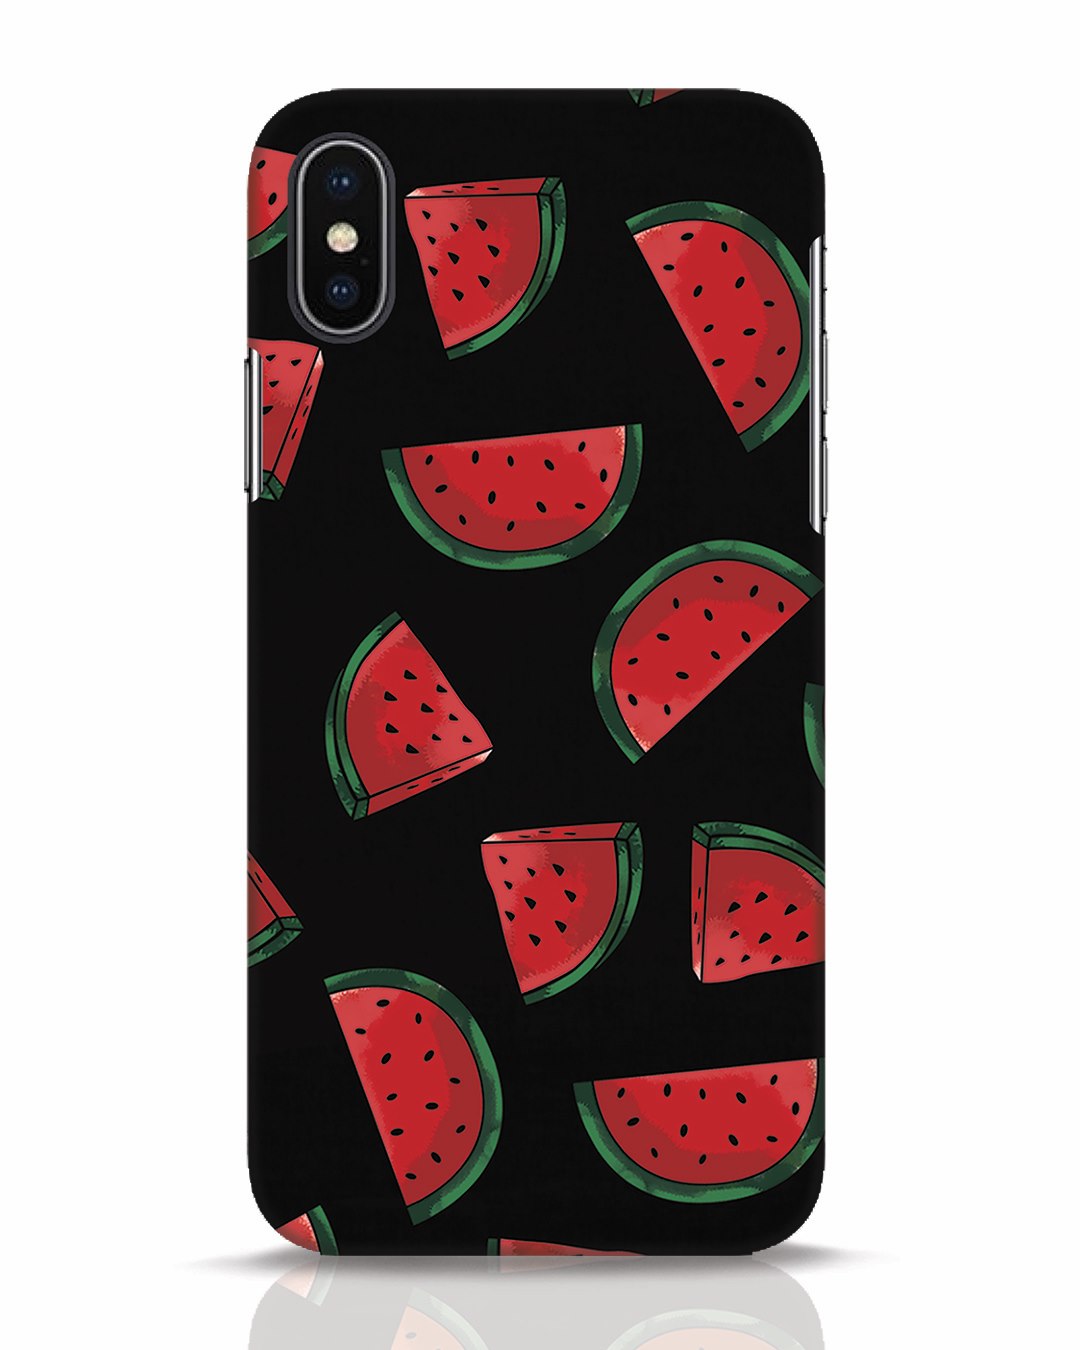 Watermelons iPhone X Mobile Cover iPhone X Mobile Covers Bewakoof.com